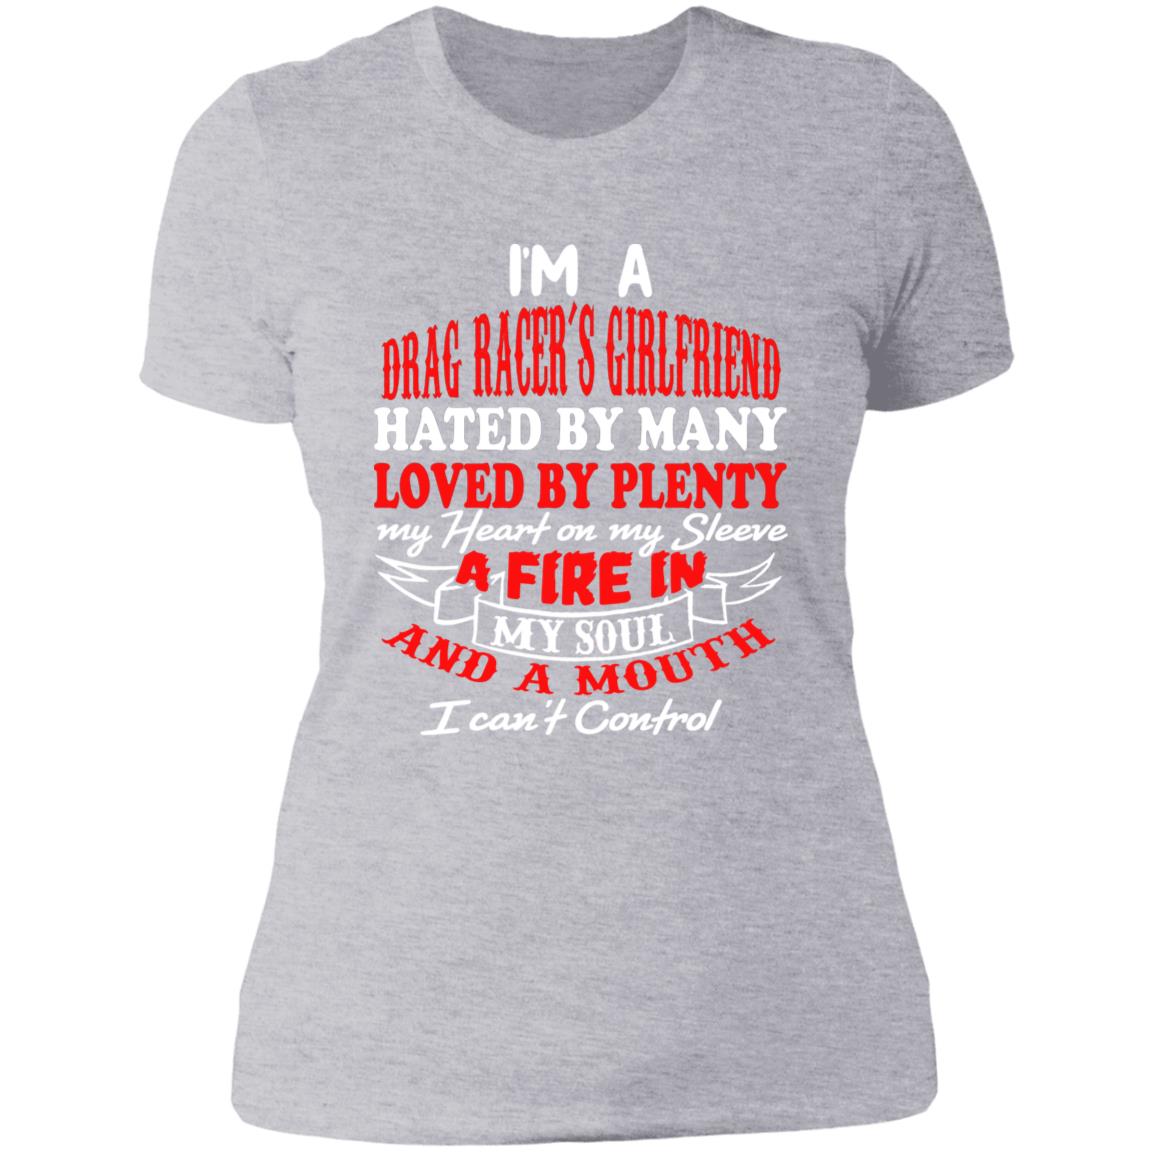 I'm A Drag Racer's Girlfriend Hated By Many Loved By Plenty Ladies' Boyfriend T-Shirt